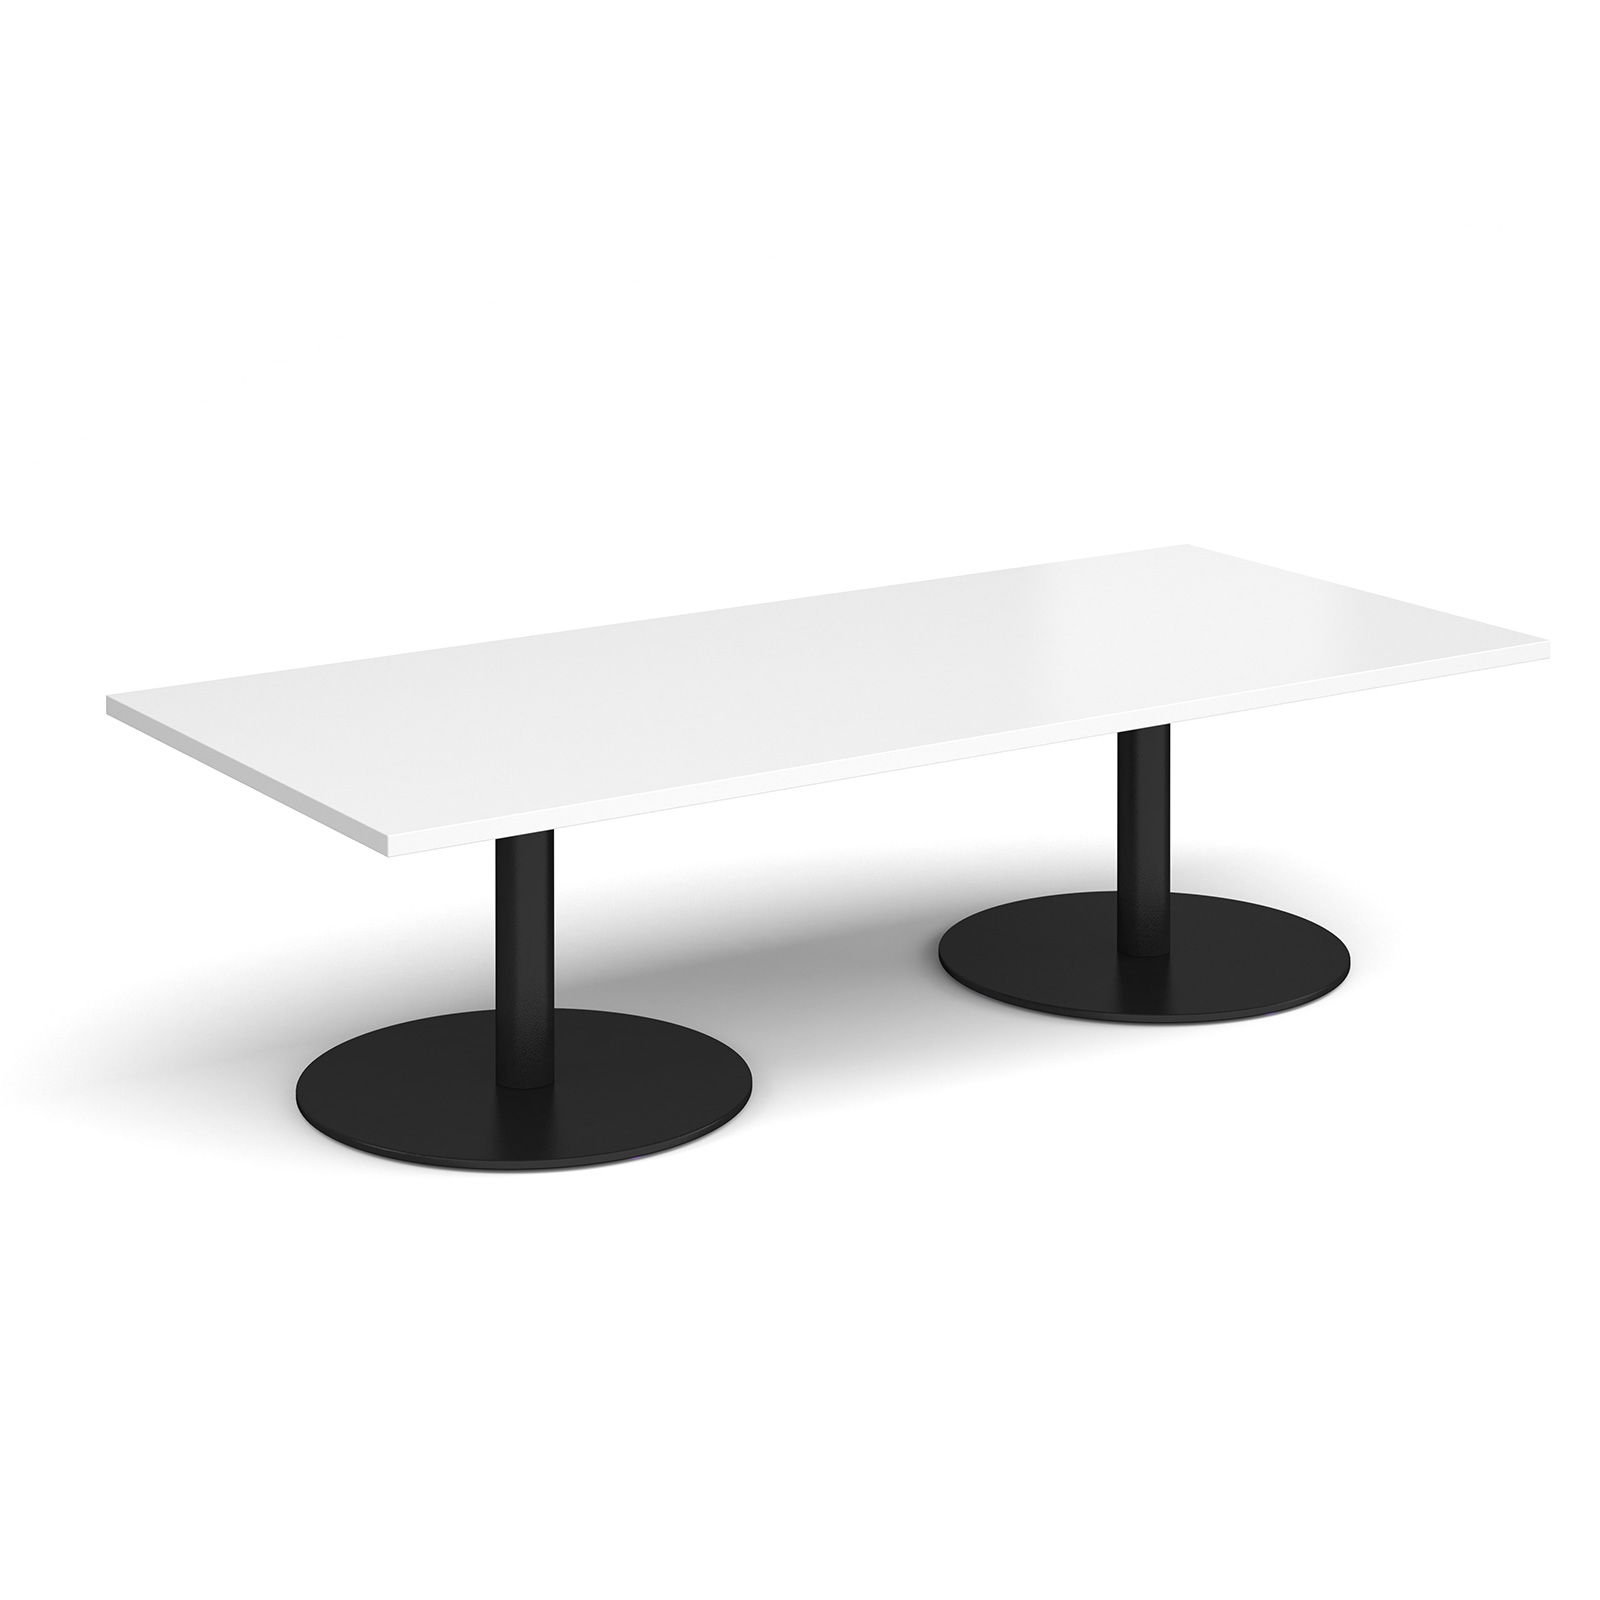 Monza rectangular coffee table with flat round bases